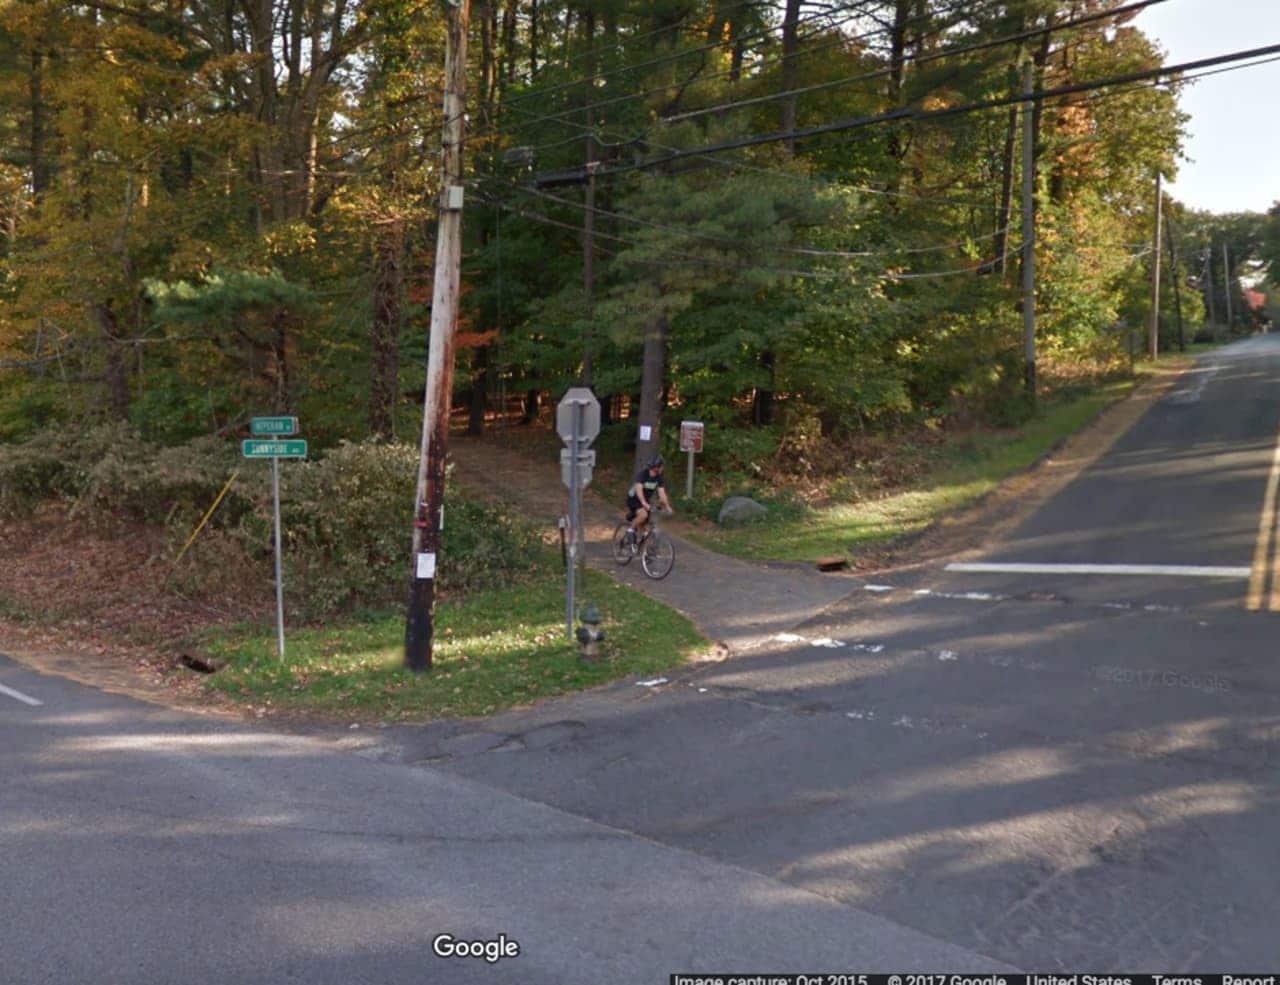 A nude man committing lewd acts was seen along the Tarrytown Lakes Fitness Trail.